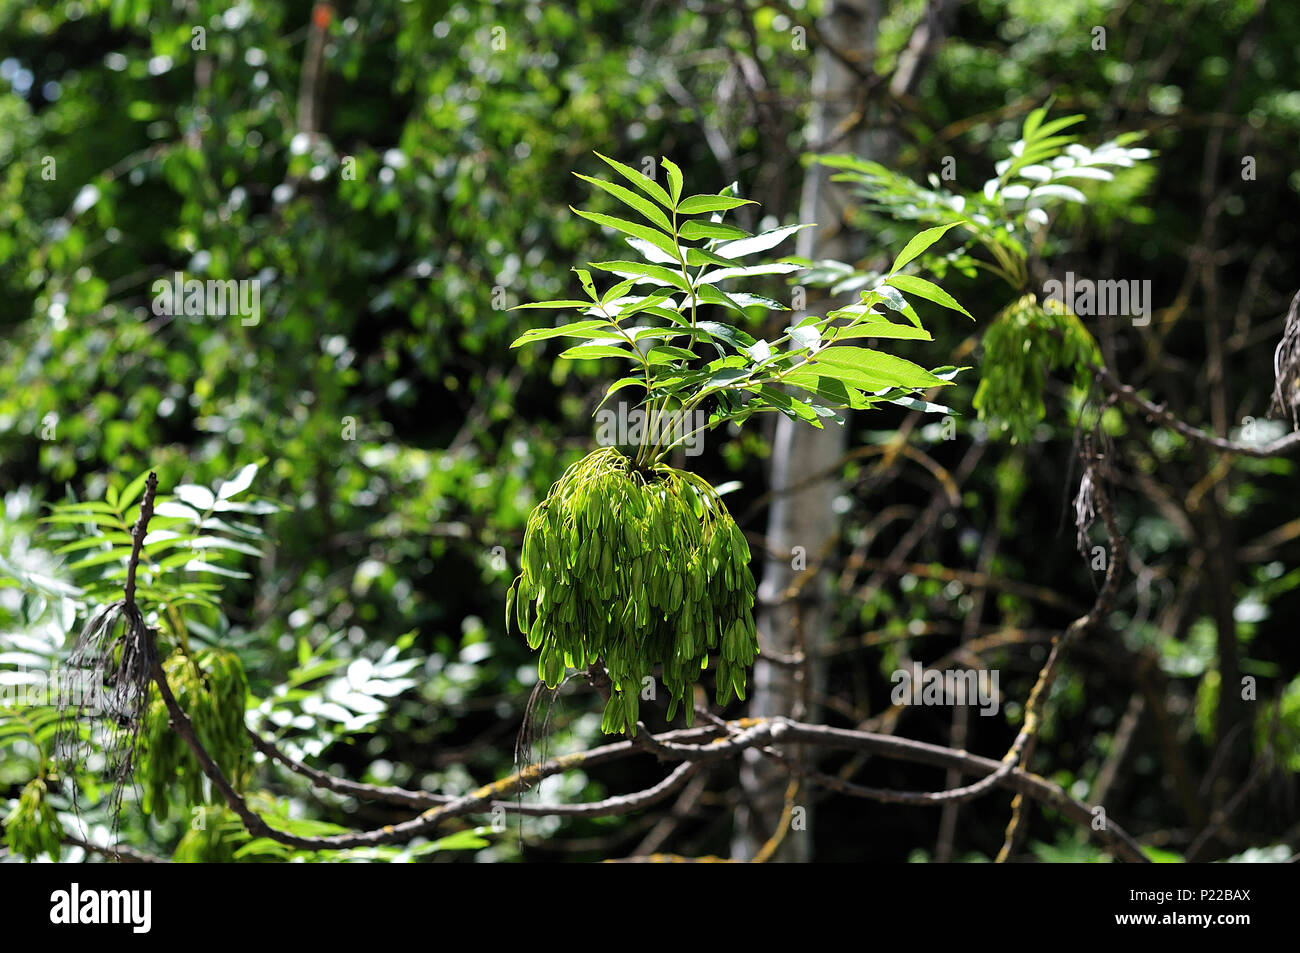 branches of fraxinus excelsior, the european ash, with pinnate leaves and green fruits Stock Photo